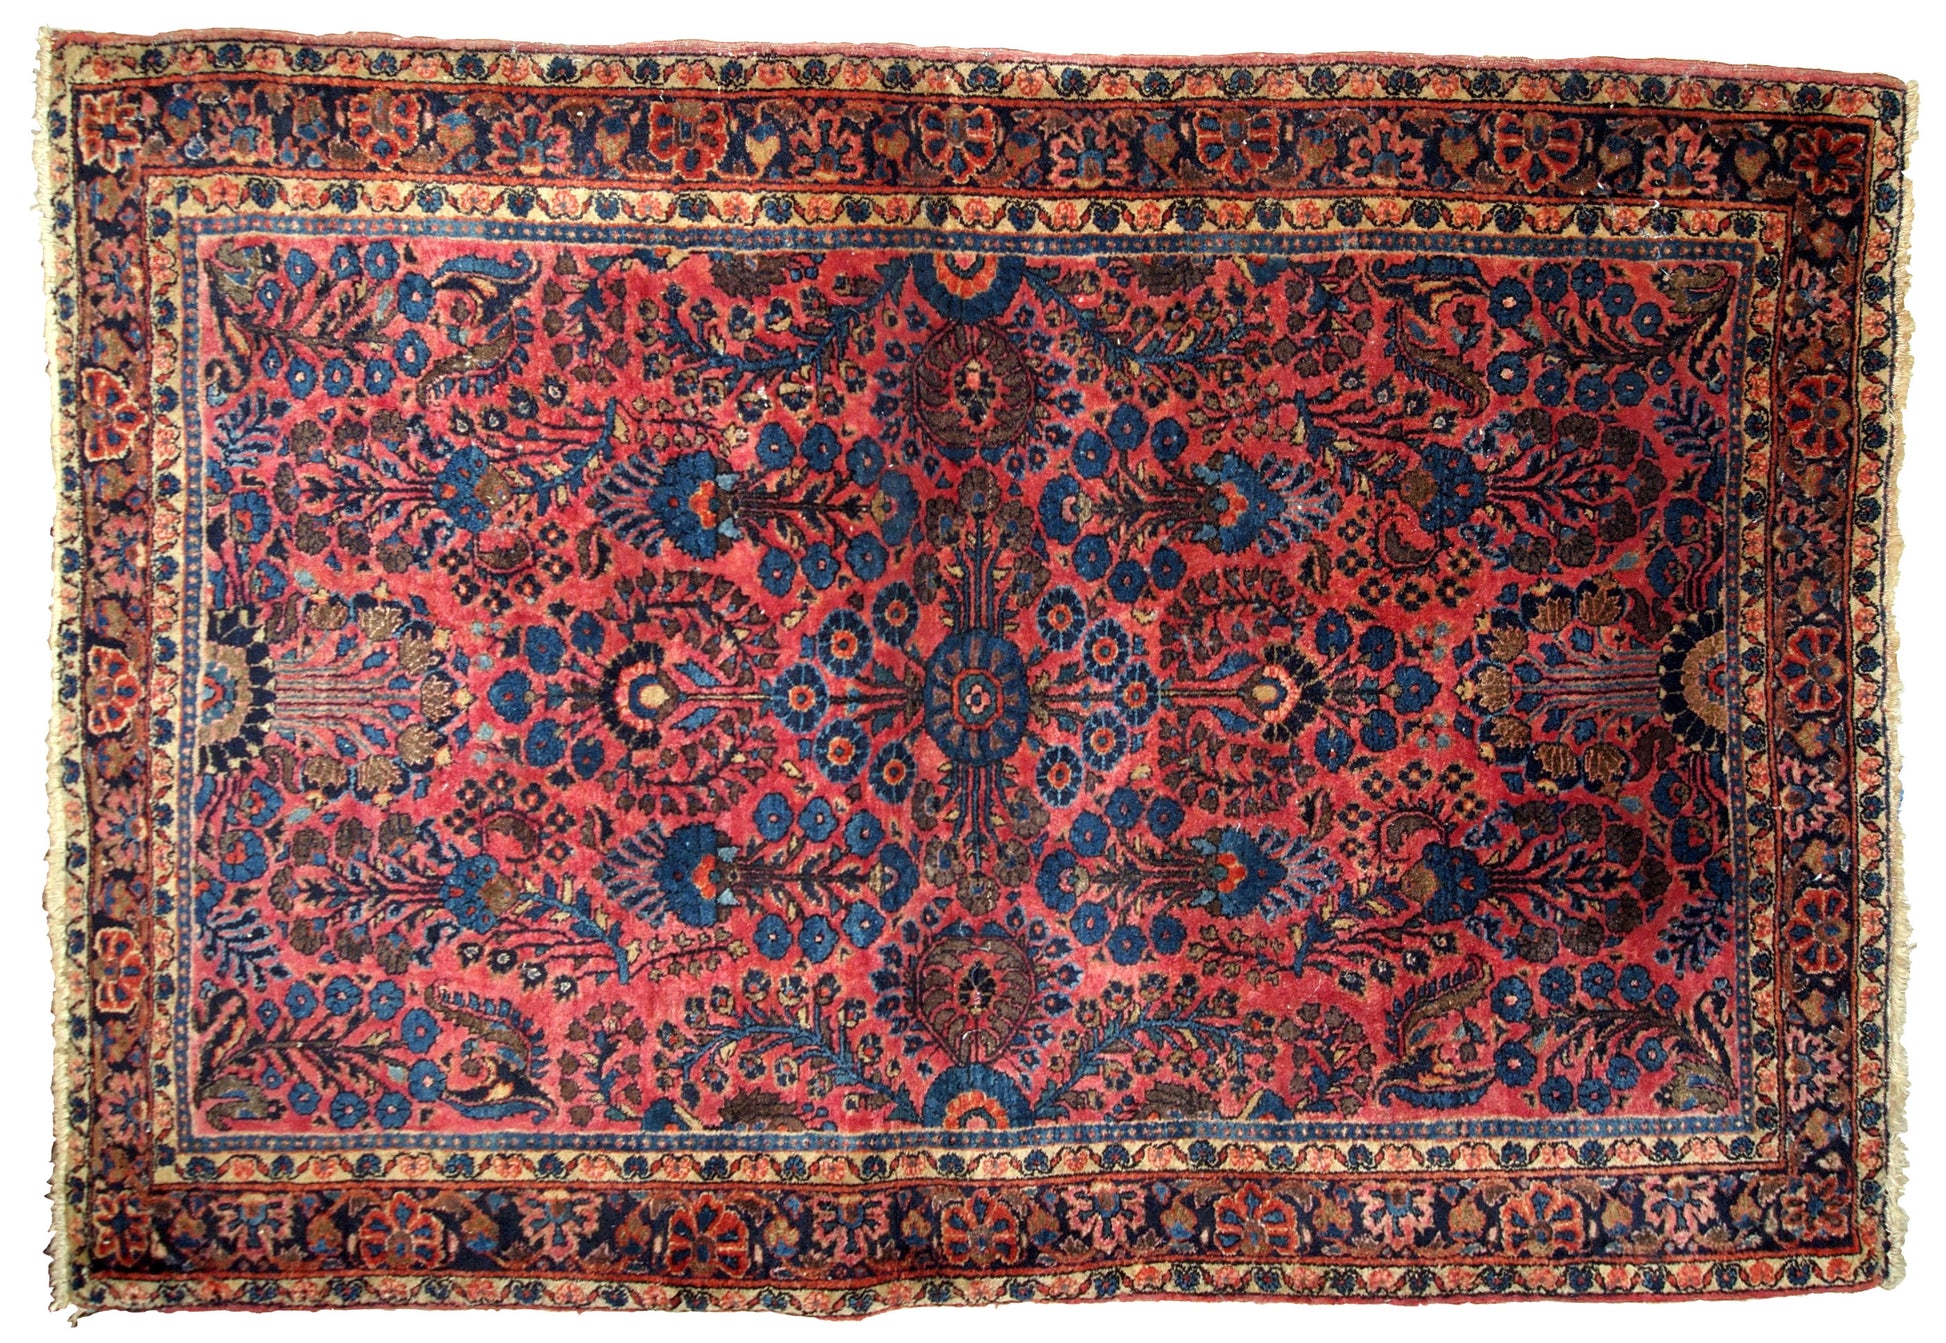 Handmade antique Sarouk rug in bright red and blue shades. The rug is in original good condition from the beginning of 20th century.